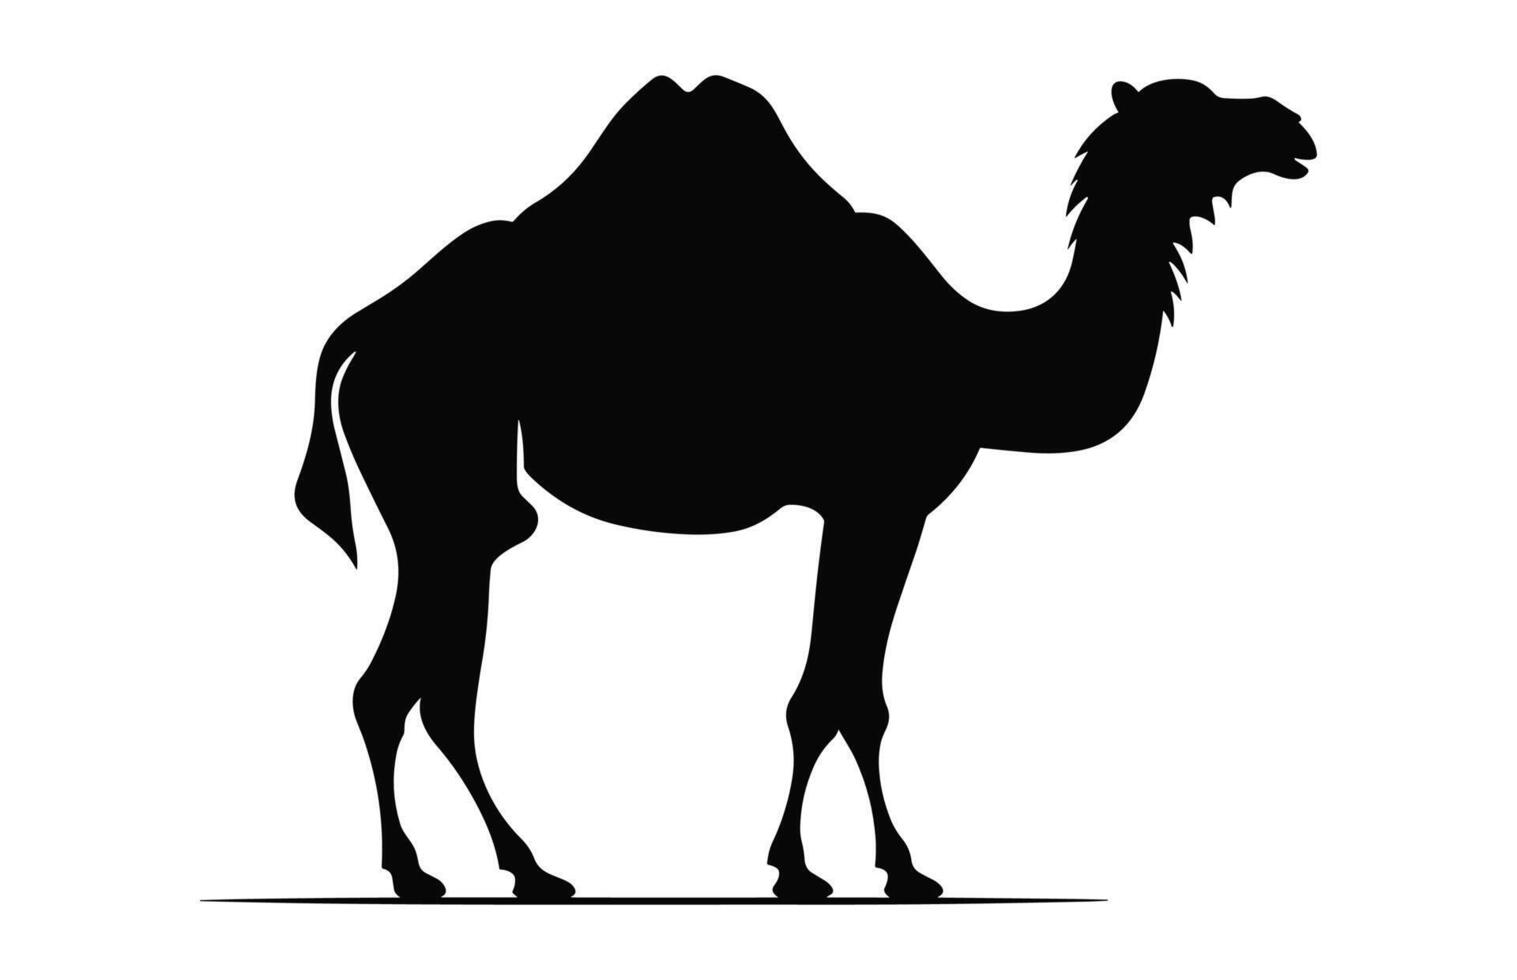 Camel Silhouette vector black clipart isolated on a white background